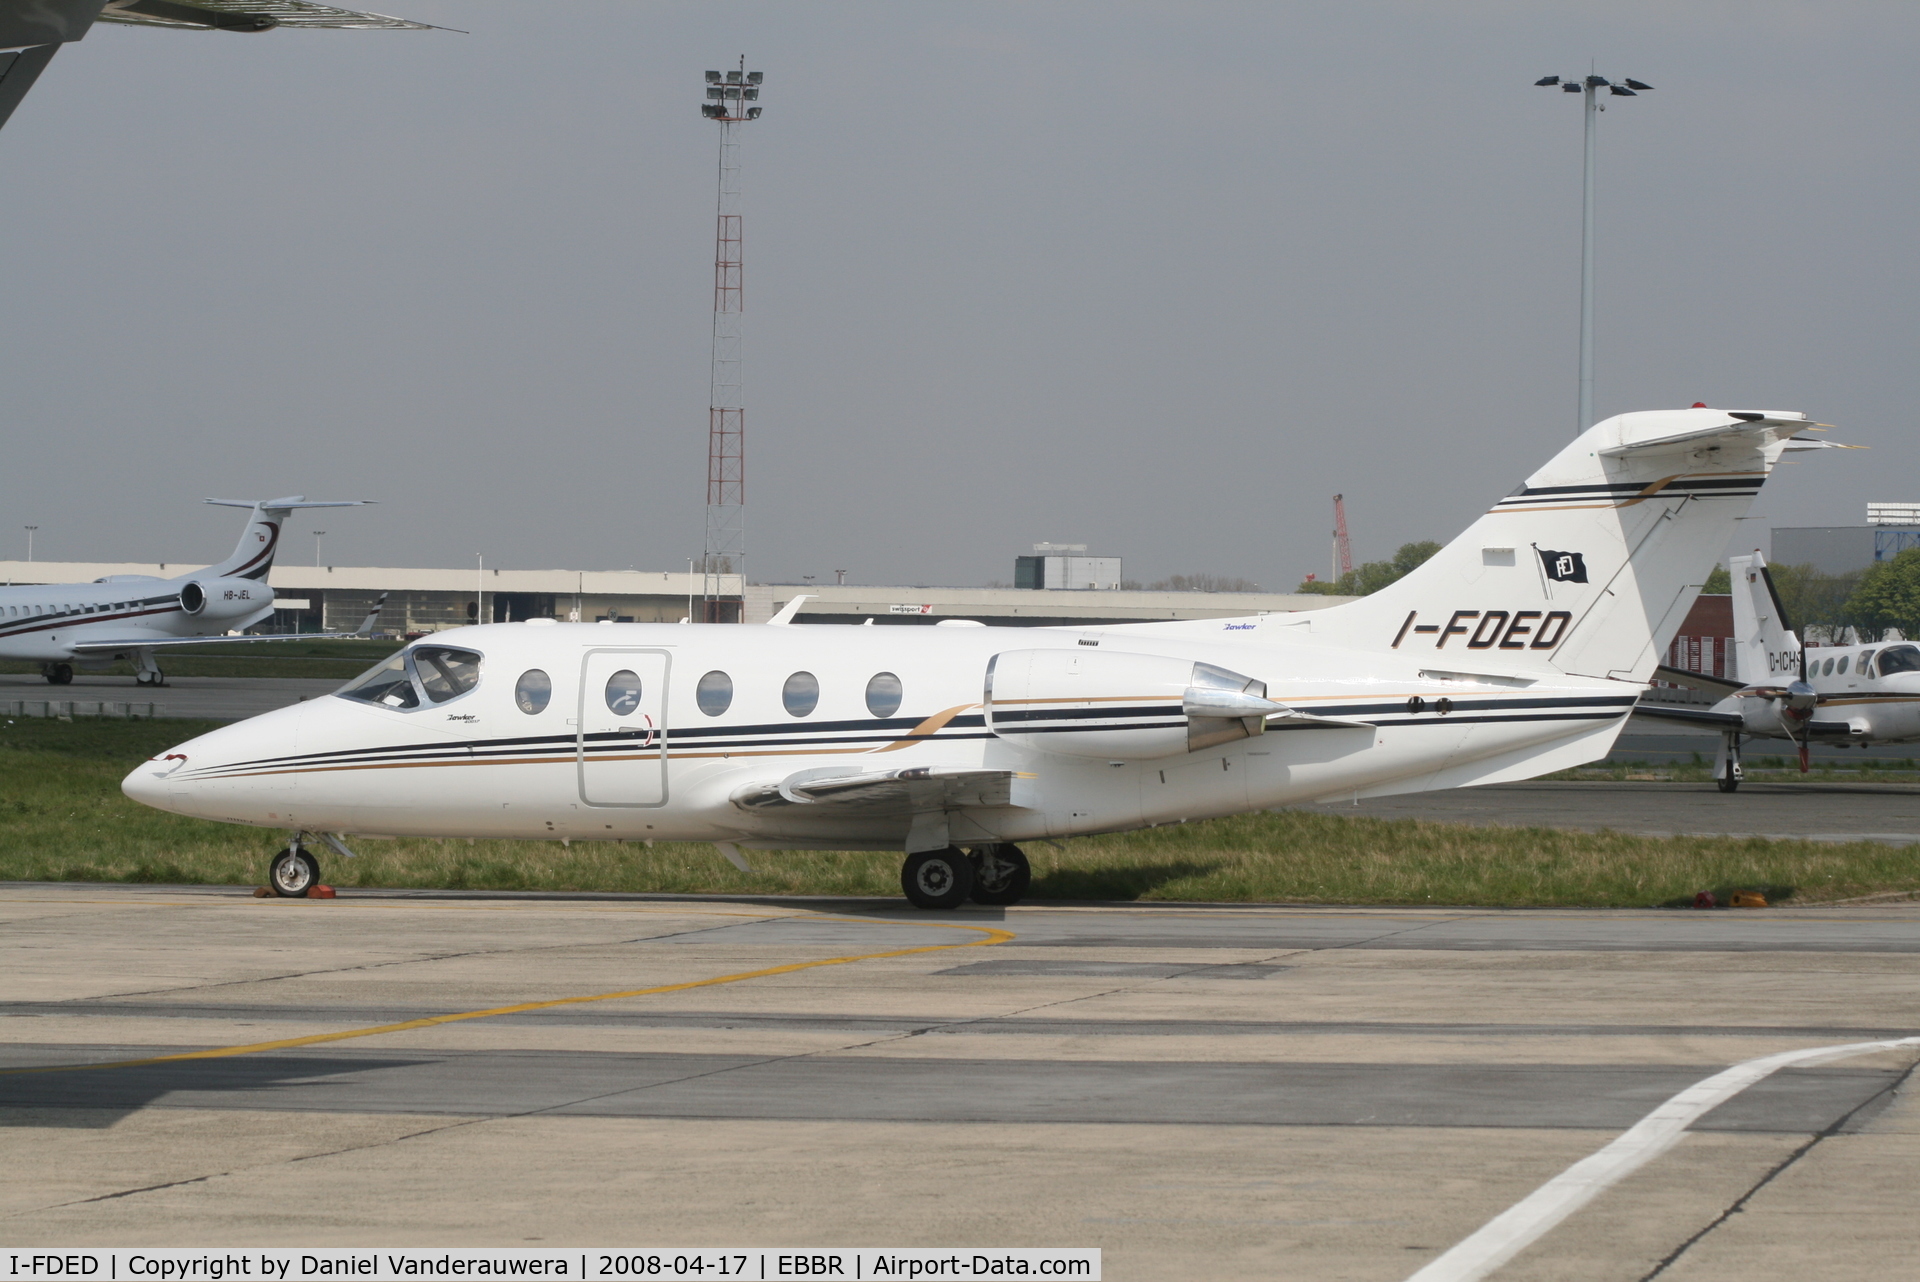 I-FDED, 1999 Raytheon Beechjet 400A C/N RK-500, parked on General Aviation apron (Abelag)